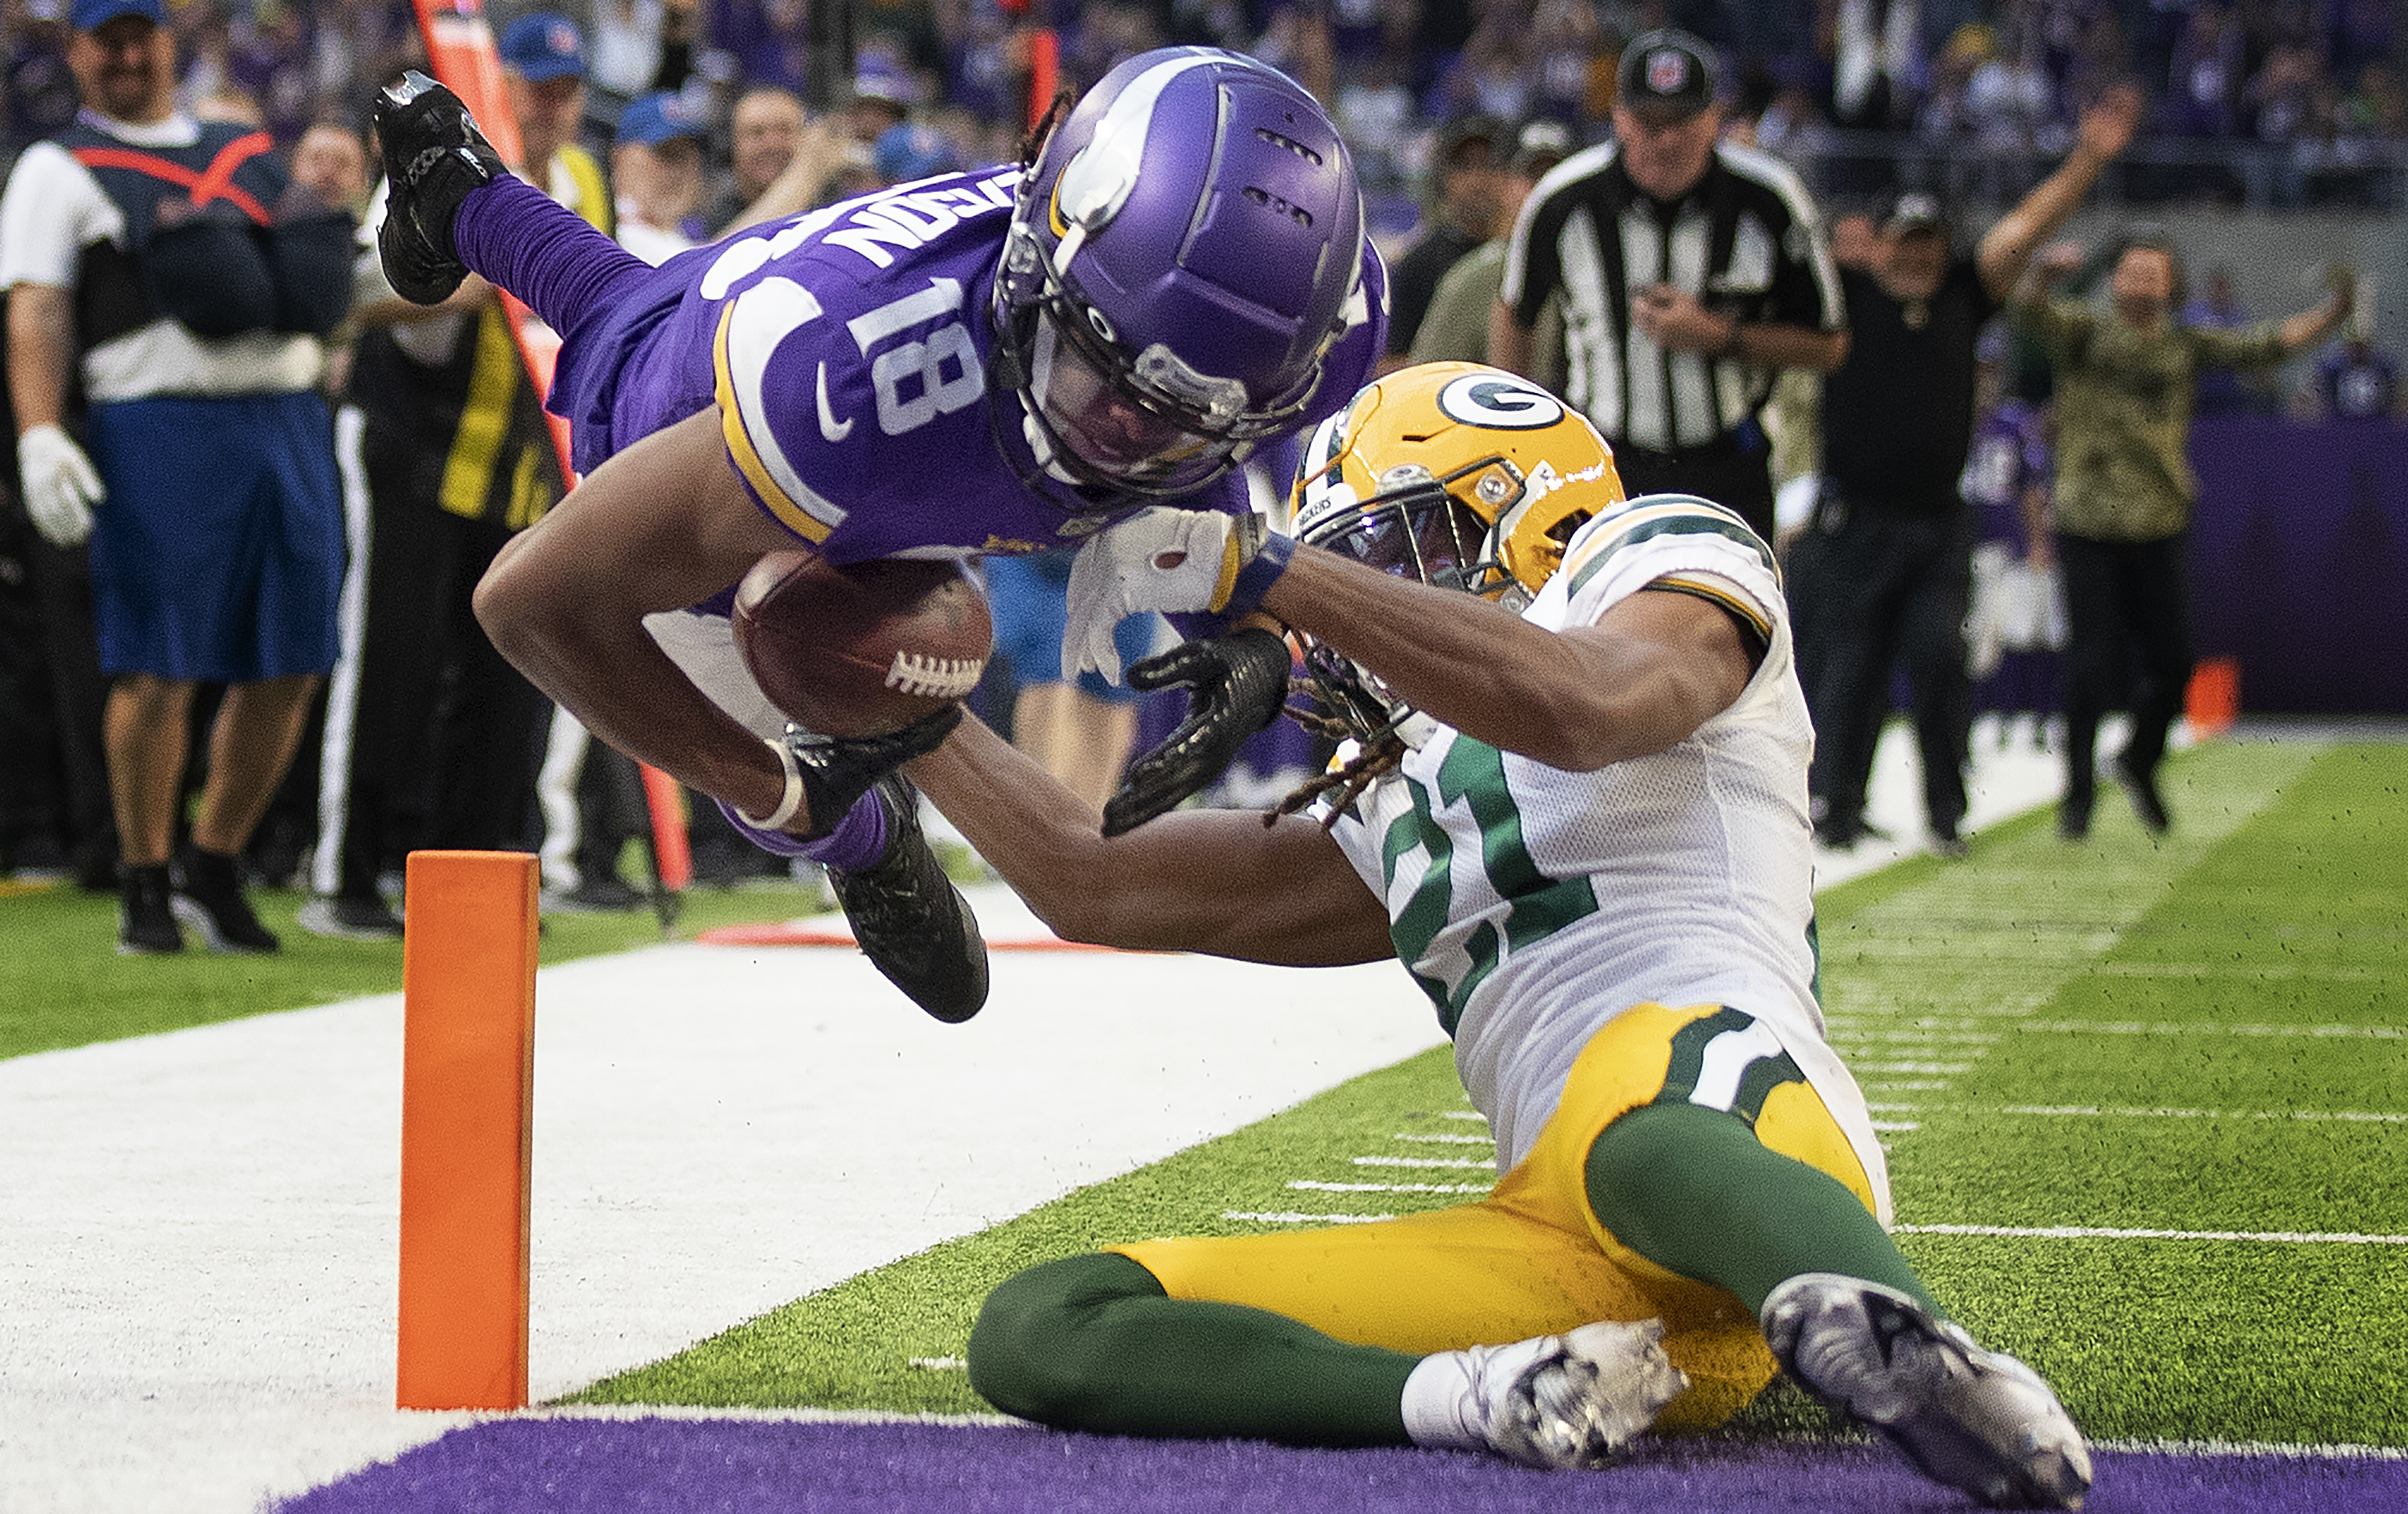 Cousins tosses 3 TDs, Vikings beat Packers